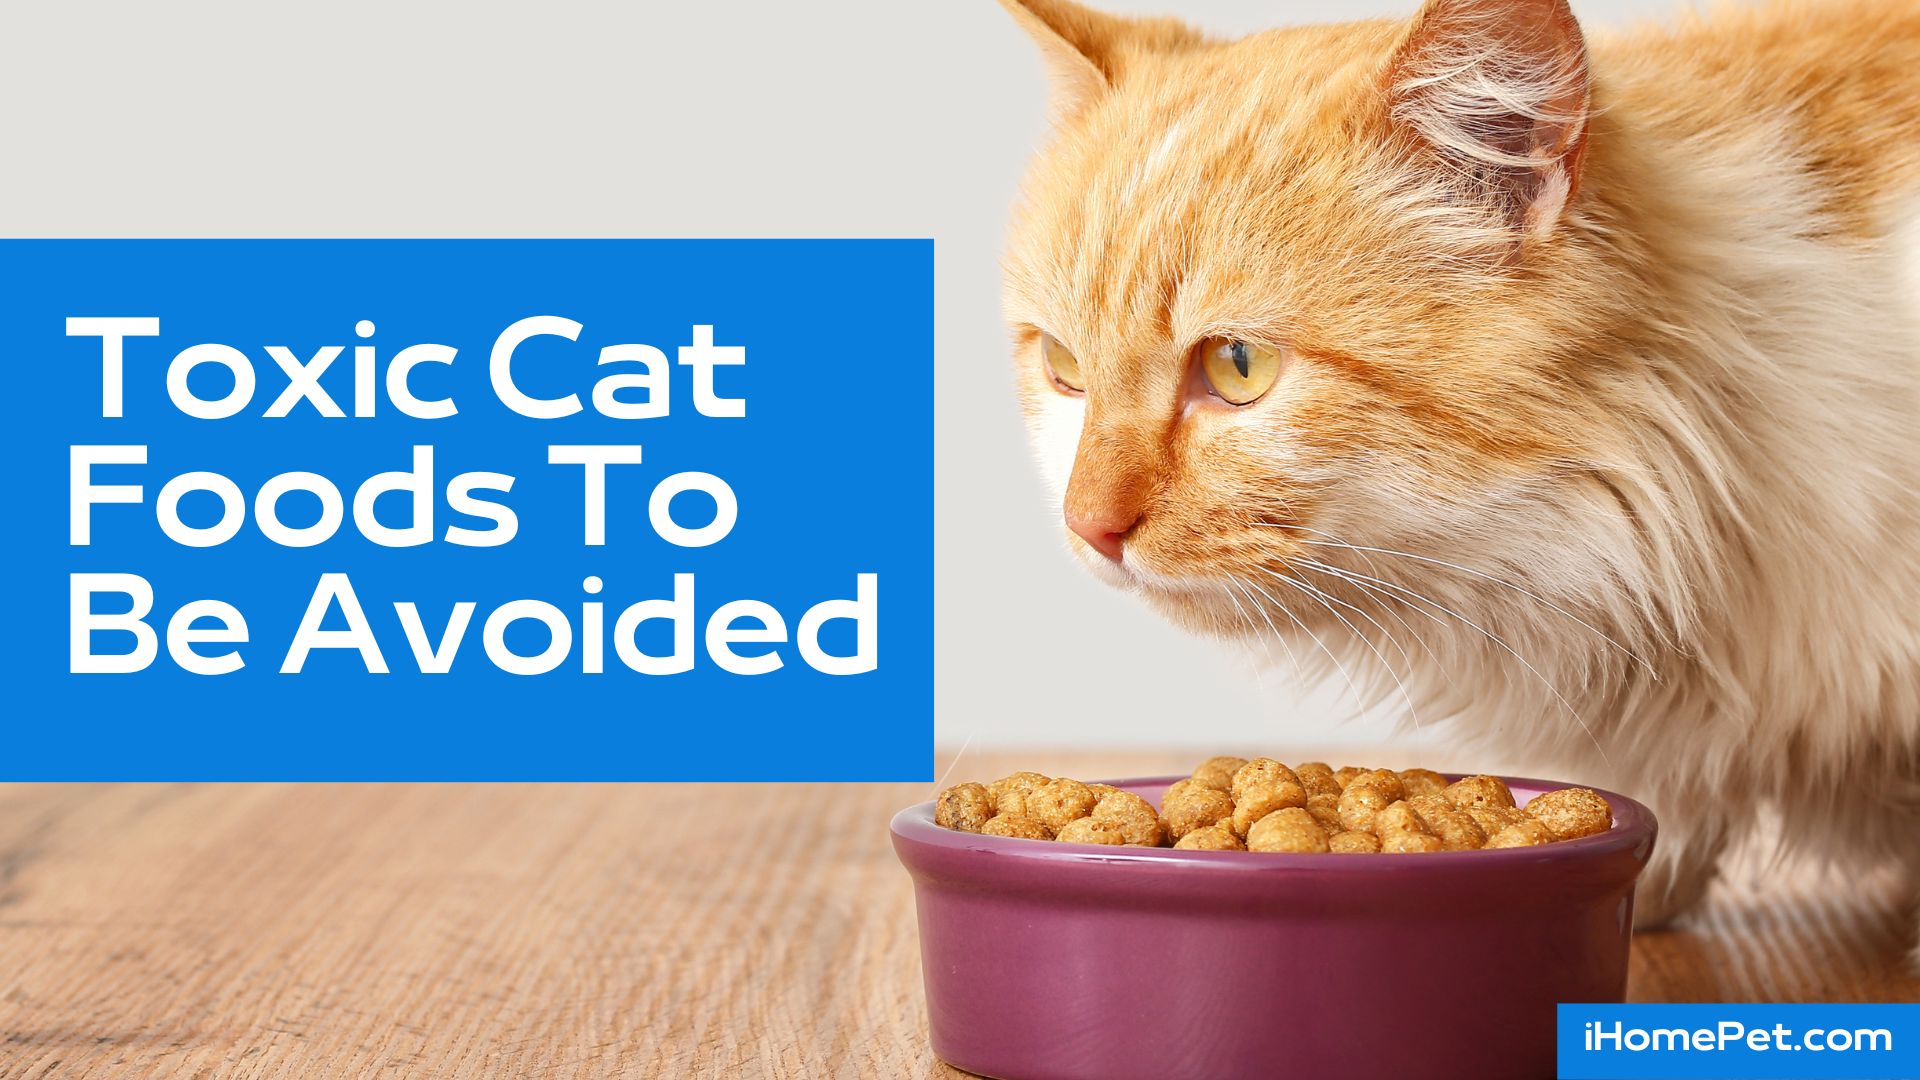 Toxic cat foods to be avoided